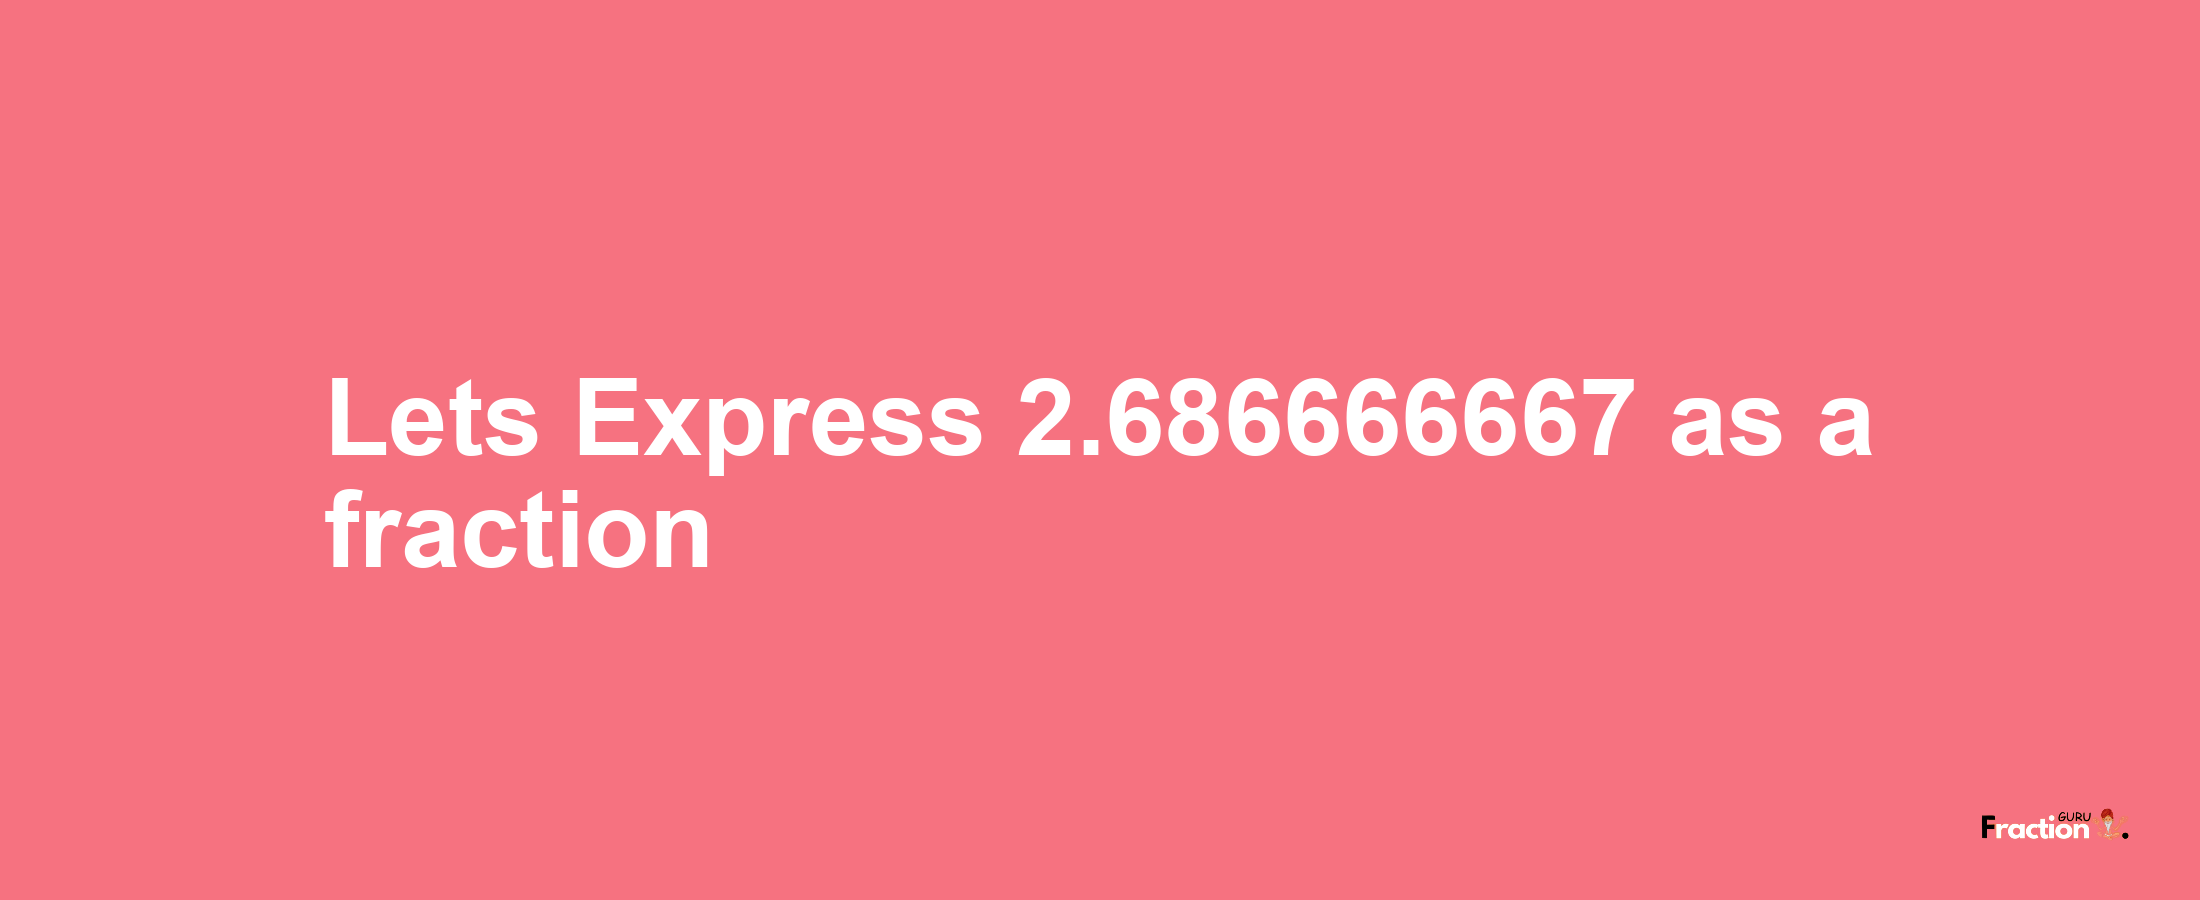 Lets Express 2.686666667 as afraction